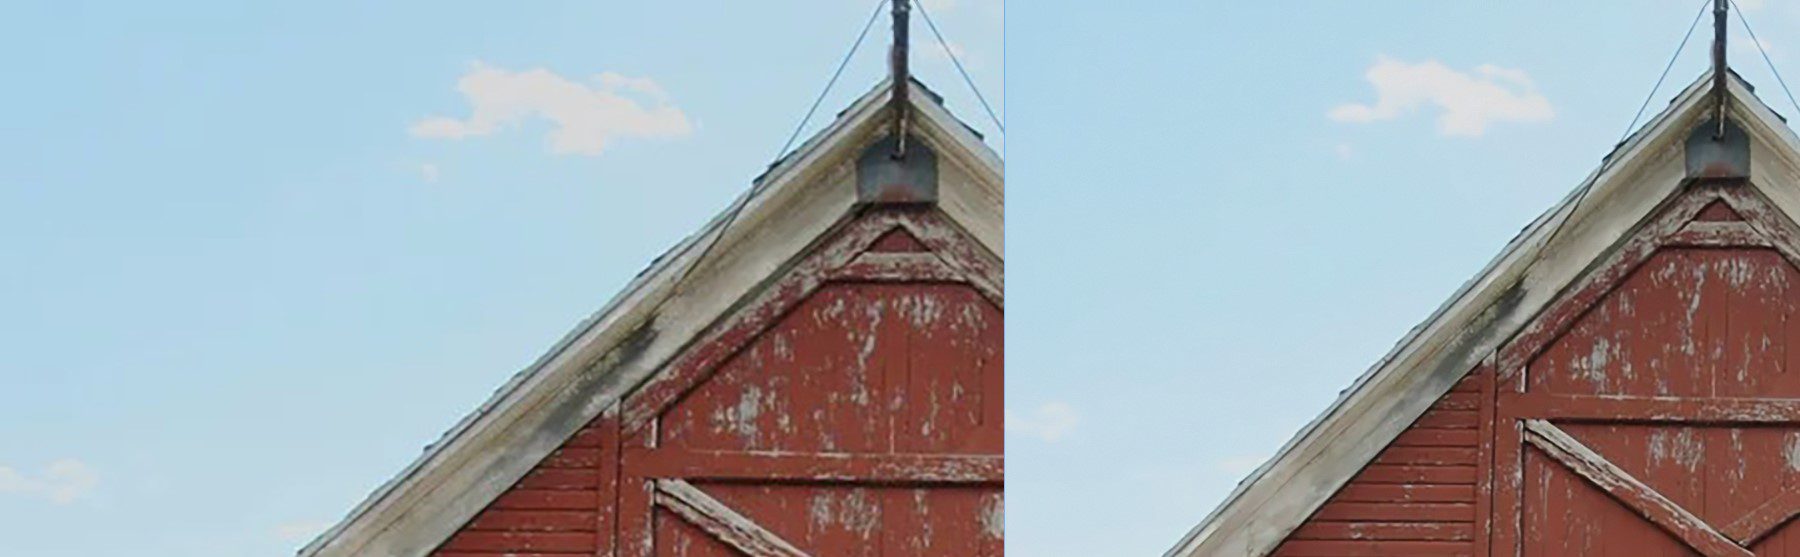 Barn Enlarged Before After - Photoshop Neural Filters